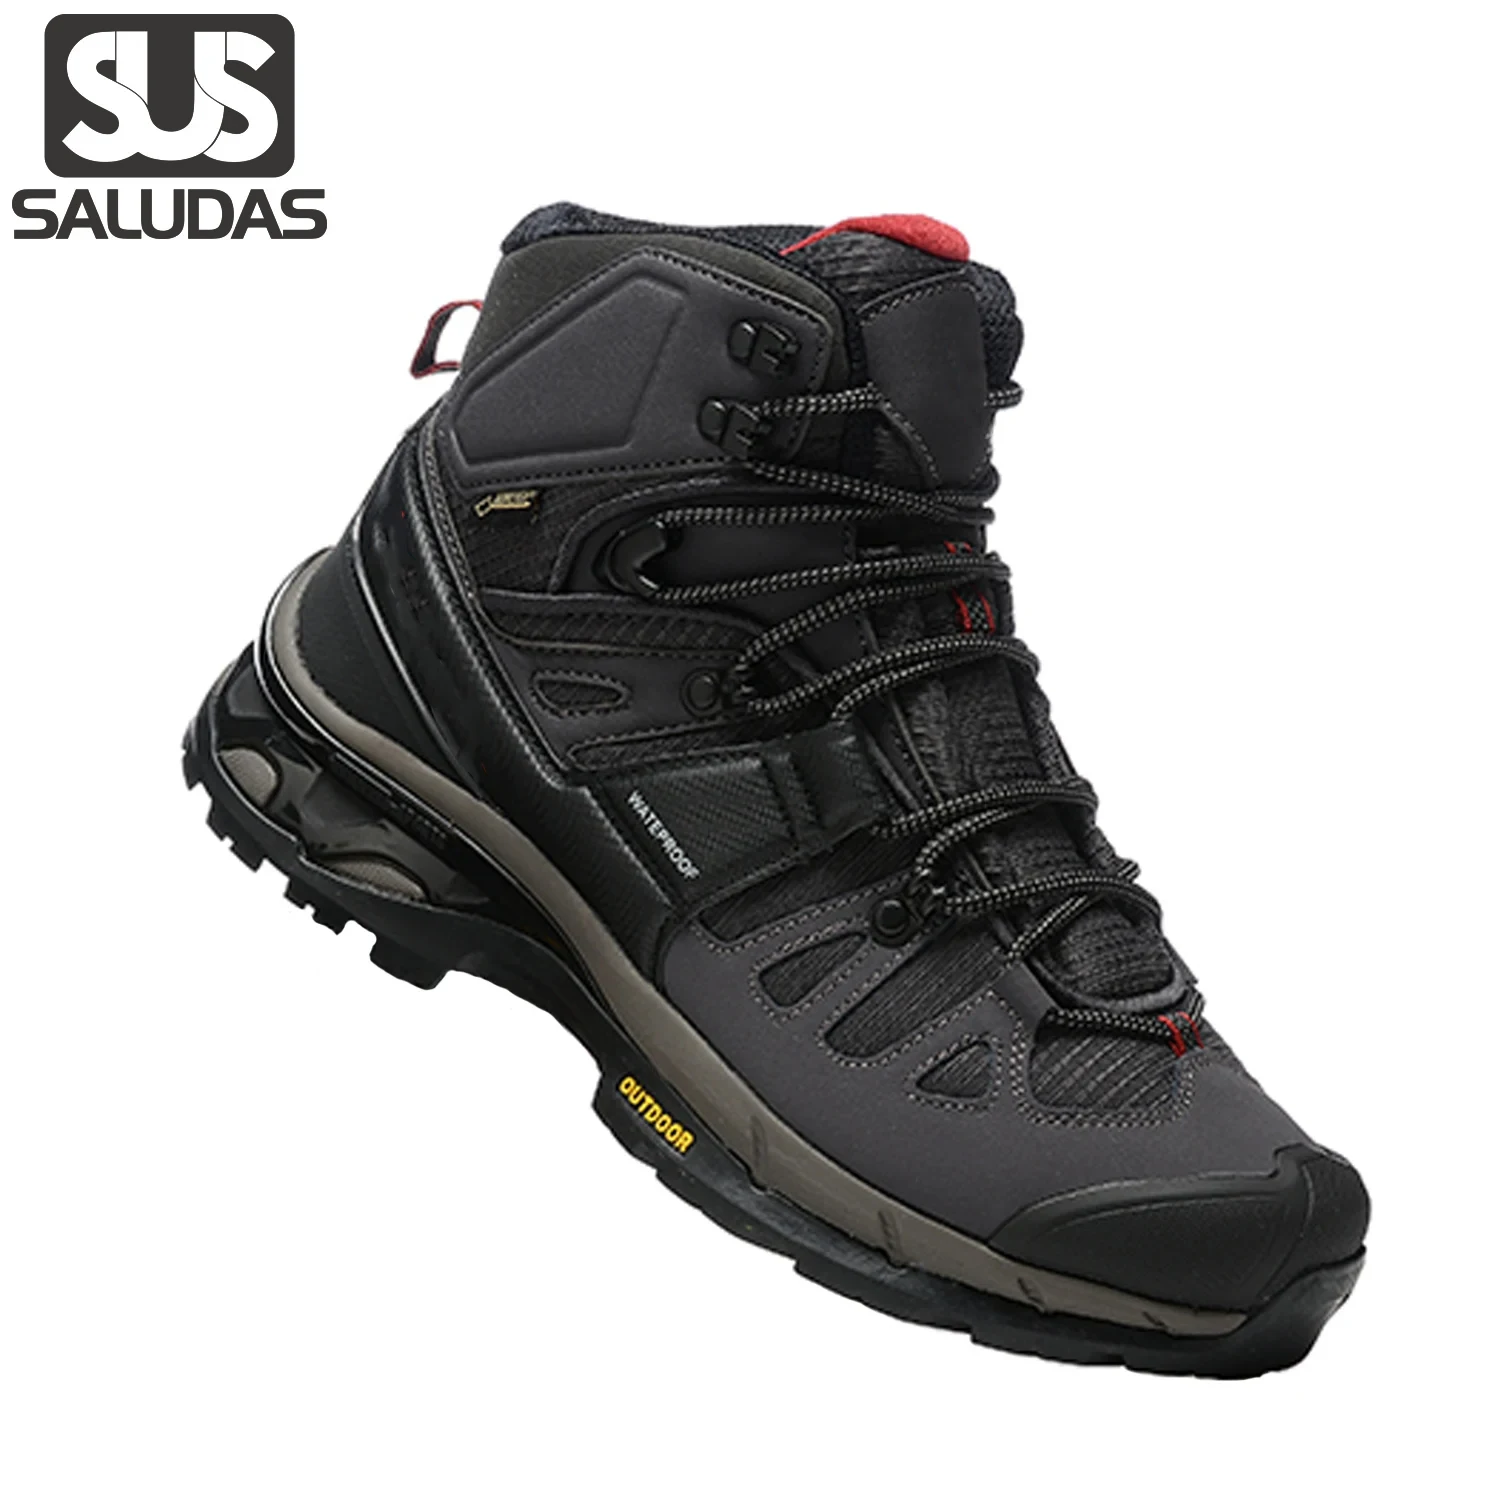 

SALUDAS Hiking Boots for Men Outdoor Trekking Shoes High Top Jungle Mountain Adventure Tactical Boots Non-slip Men Hunting Boots